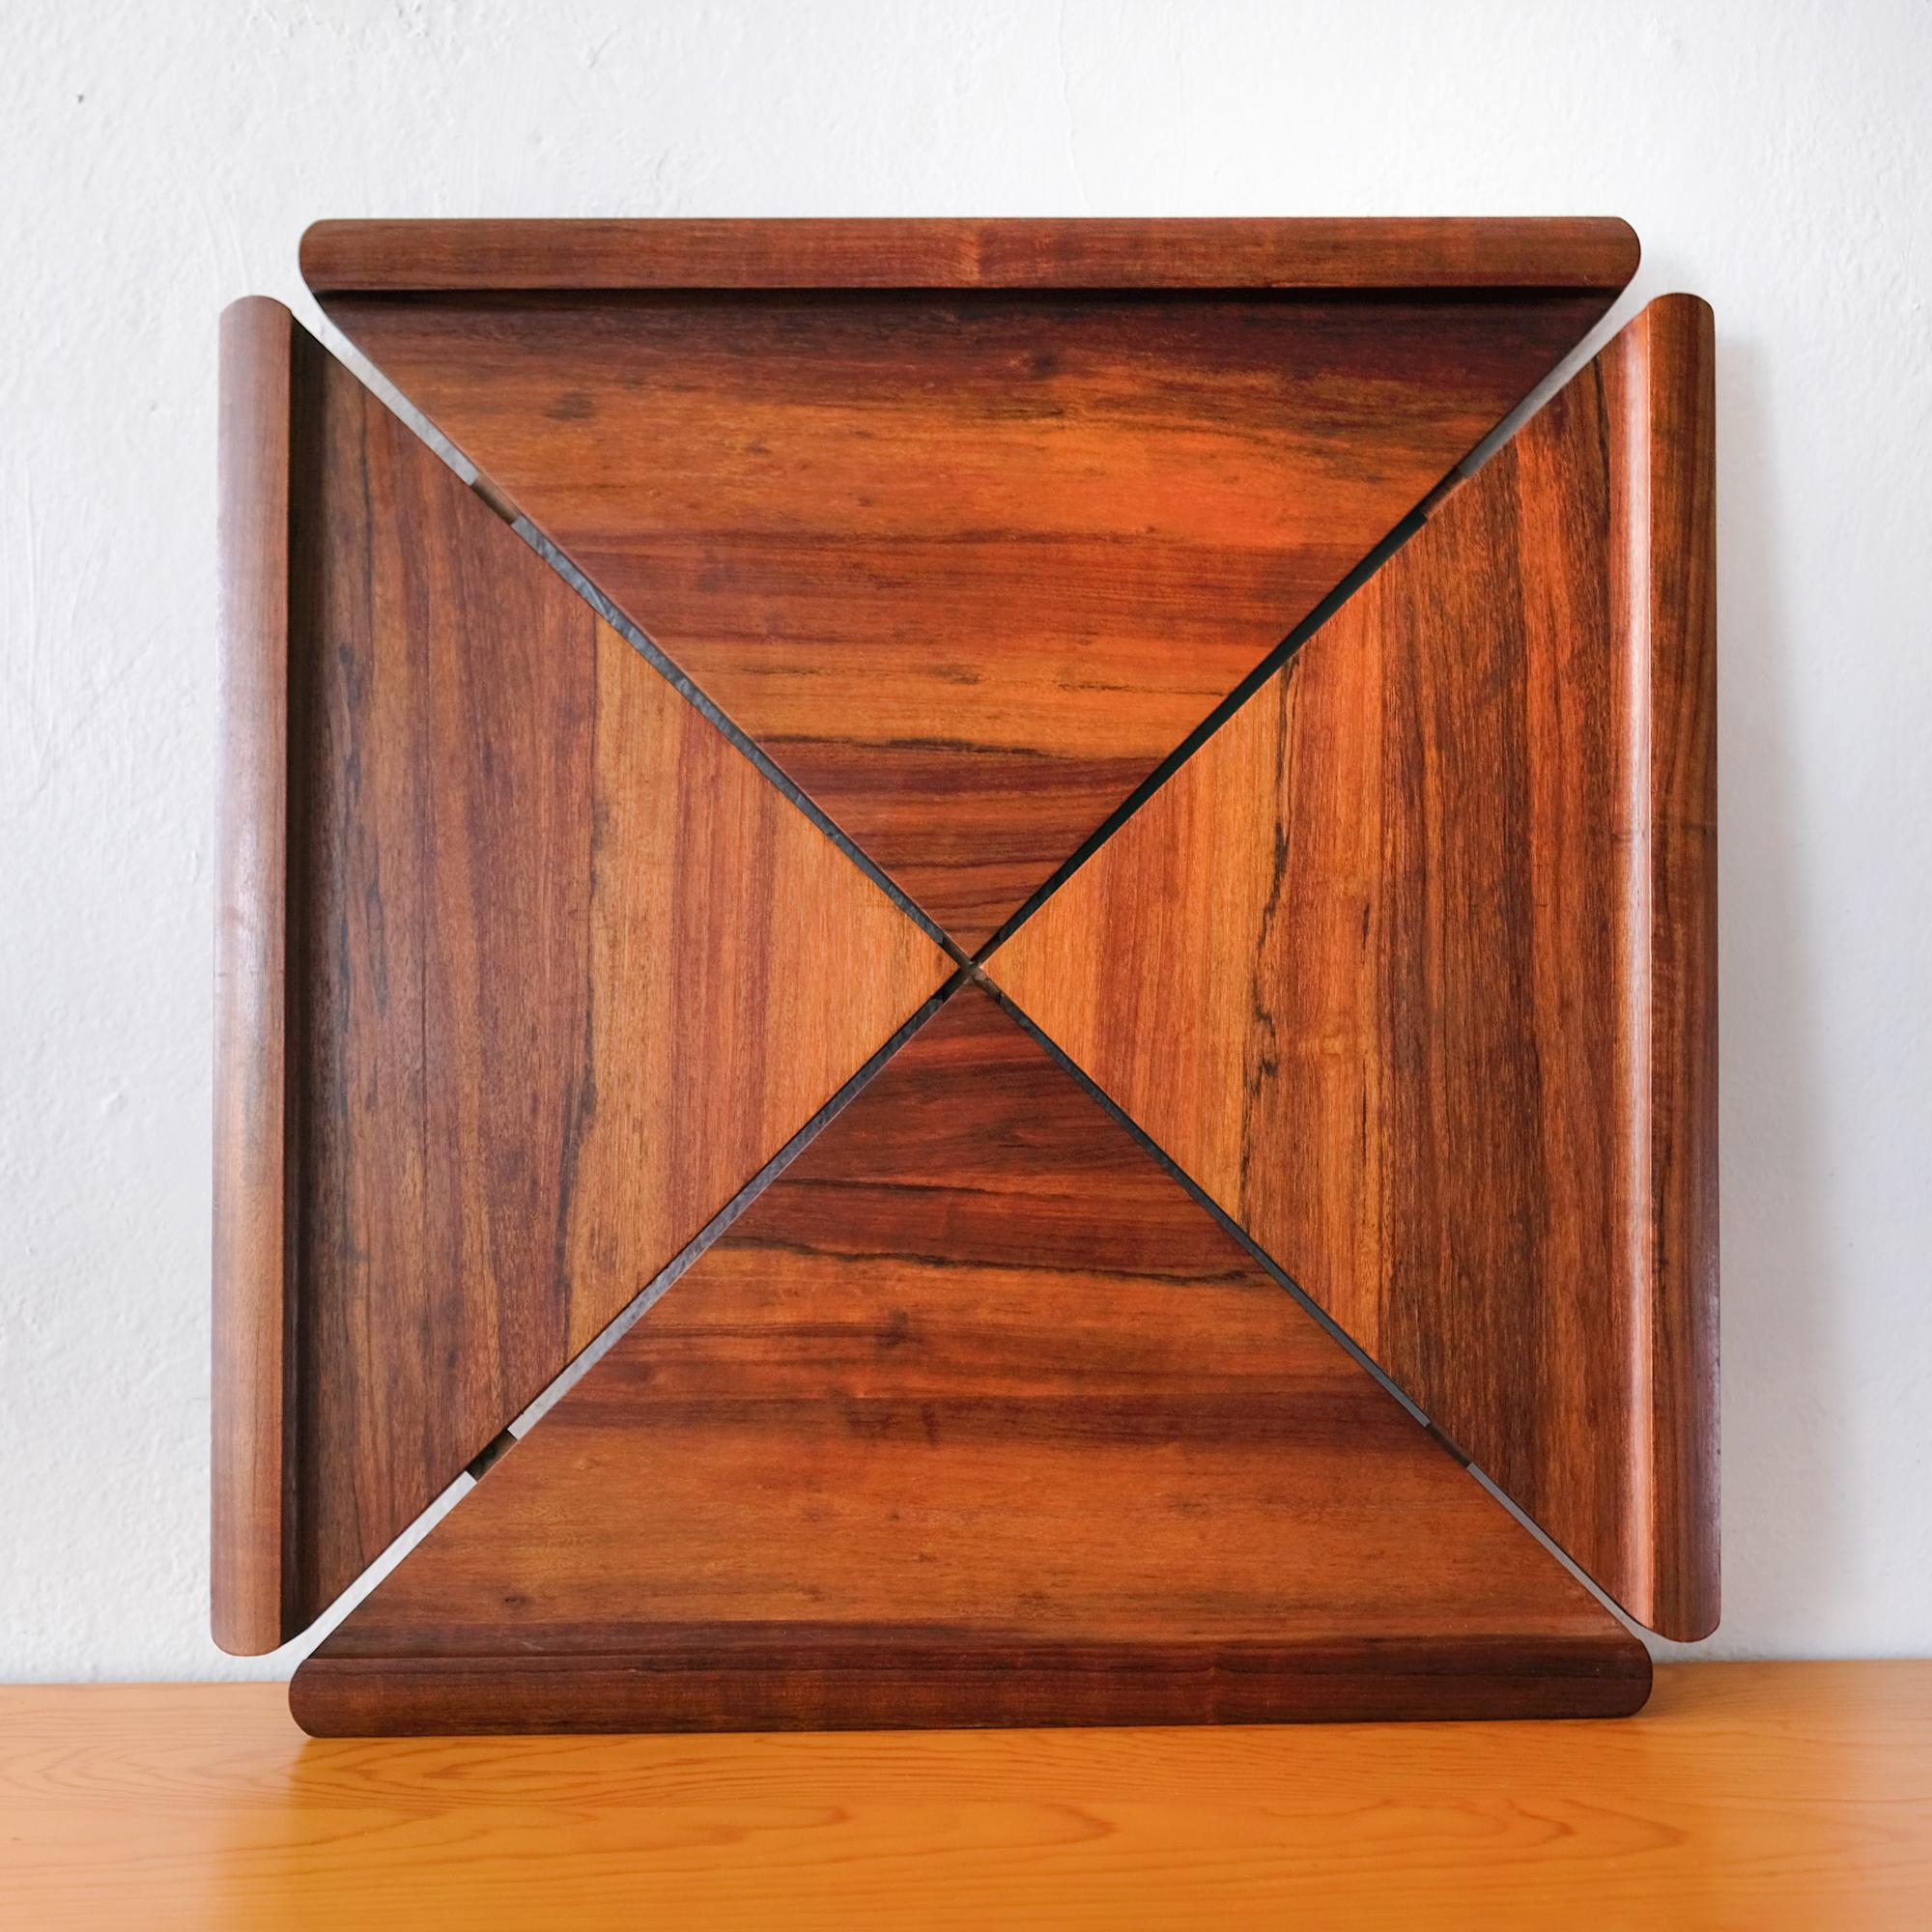 Large segmented serving tray in Mutenye (Africa), from the Dansk rare woods line. Designed by Jens Quistgaard. Denmark, 1960s.